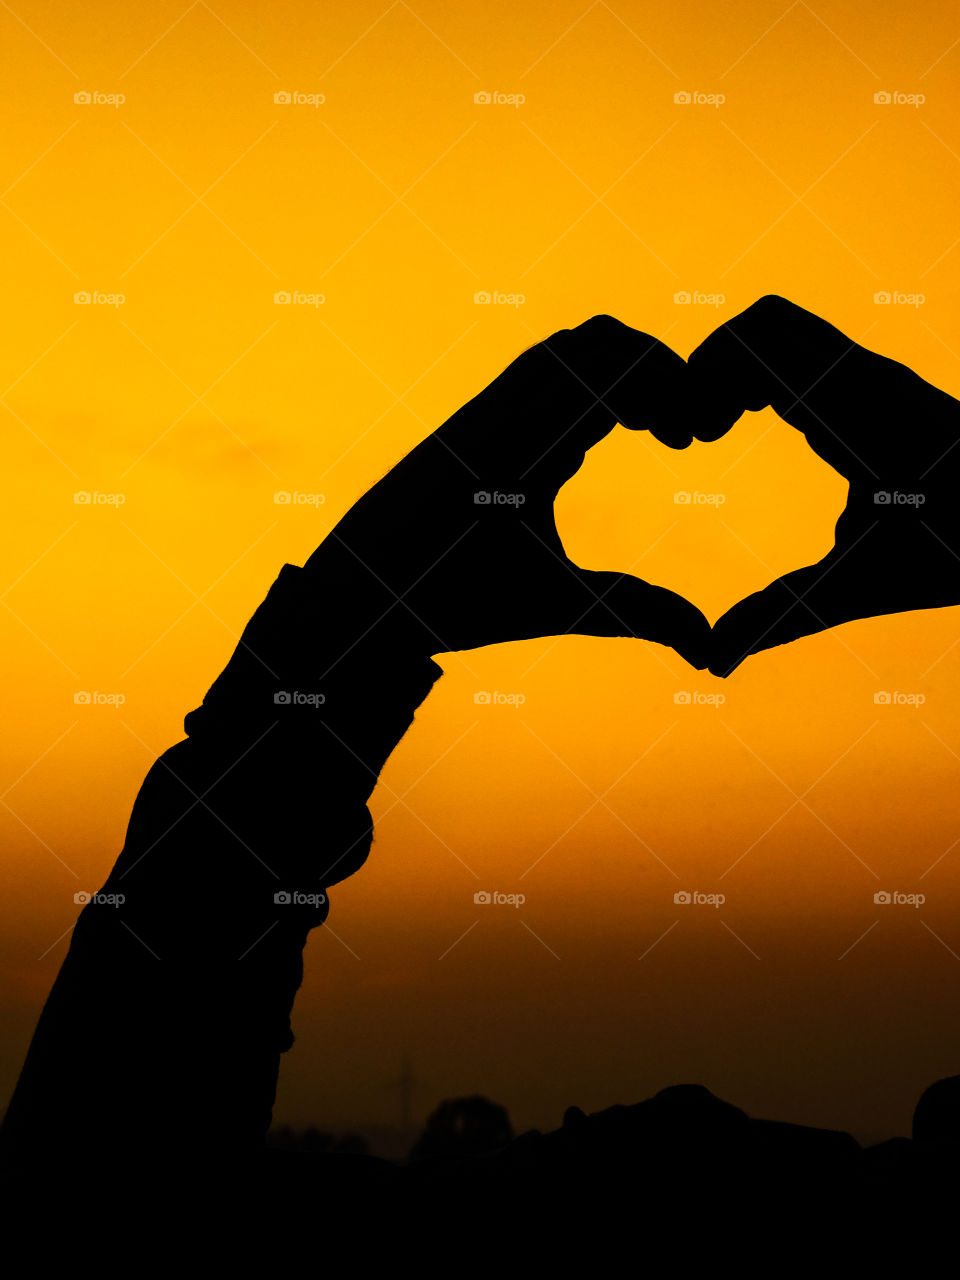 Love wallpaper or heart shaped hand posture with beautiful background of after sunset golden light .